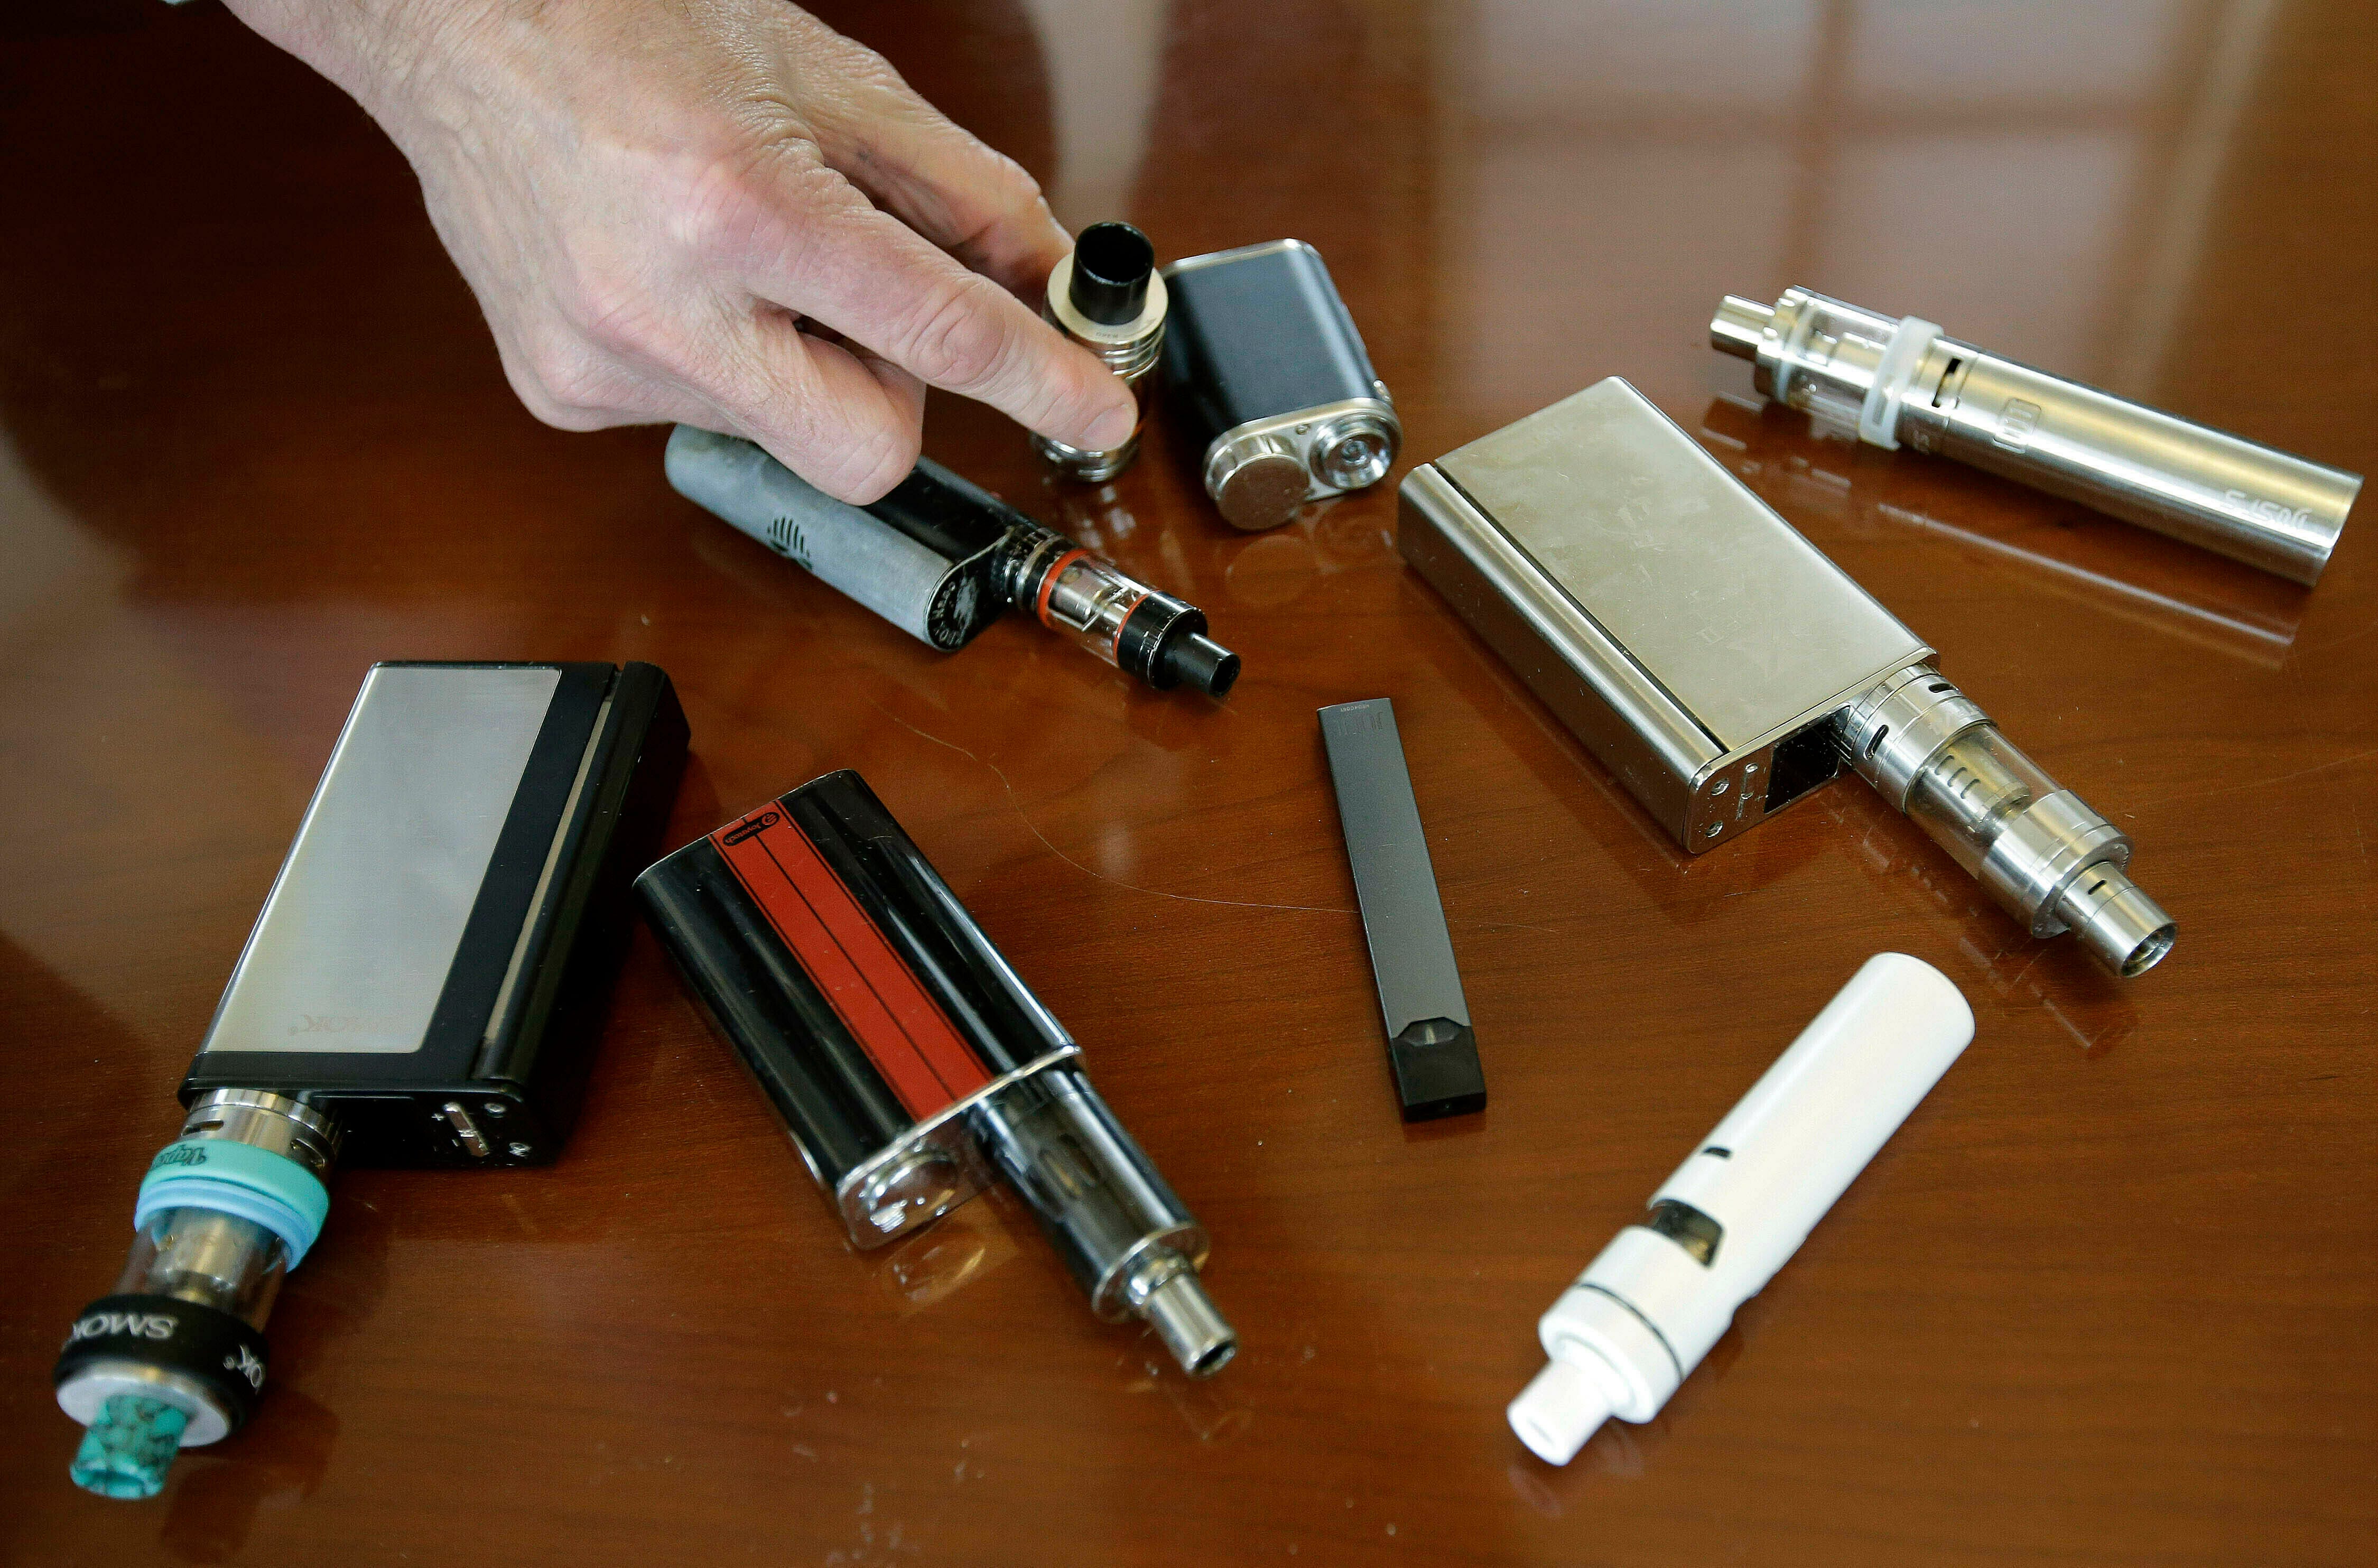 Vaping Risks Worse With Thc Oil And 4 Other Things You Need To Know